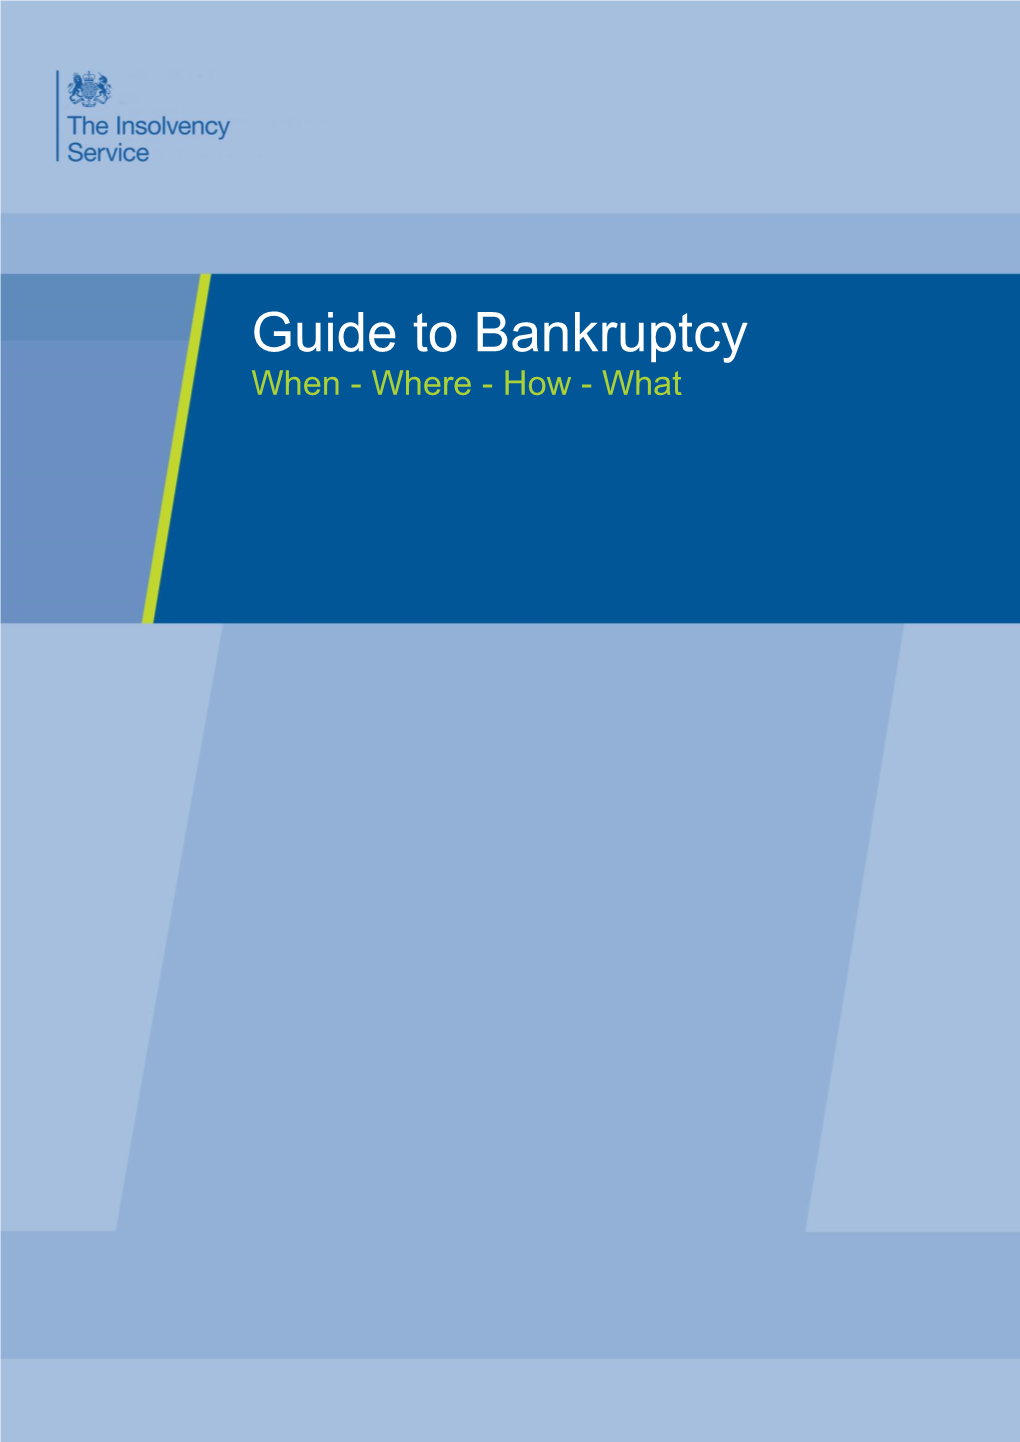 Guide to Bankruptcy When - Where - How - What